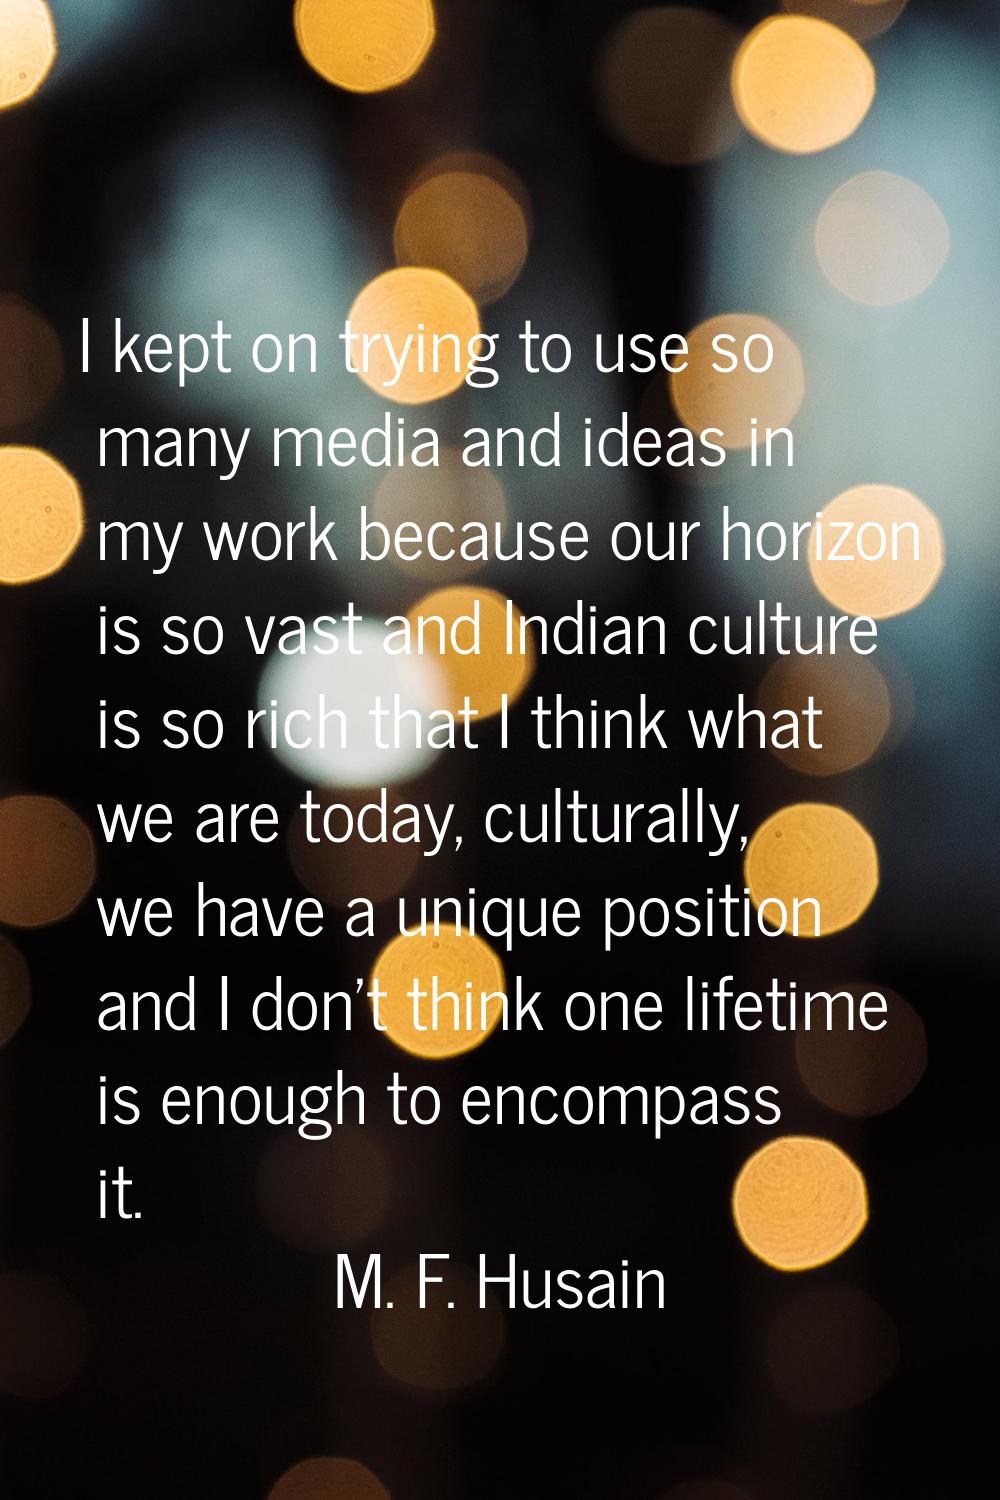 I kept on trying to use so many media and ideas in my work because our horizon is so vast and India